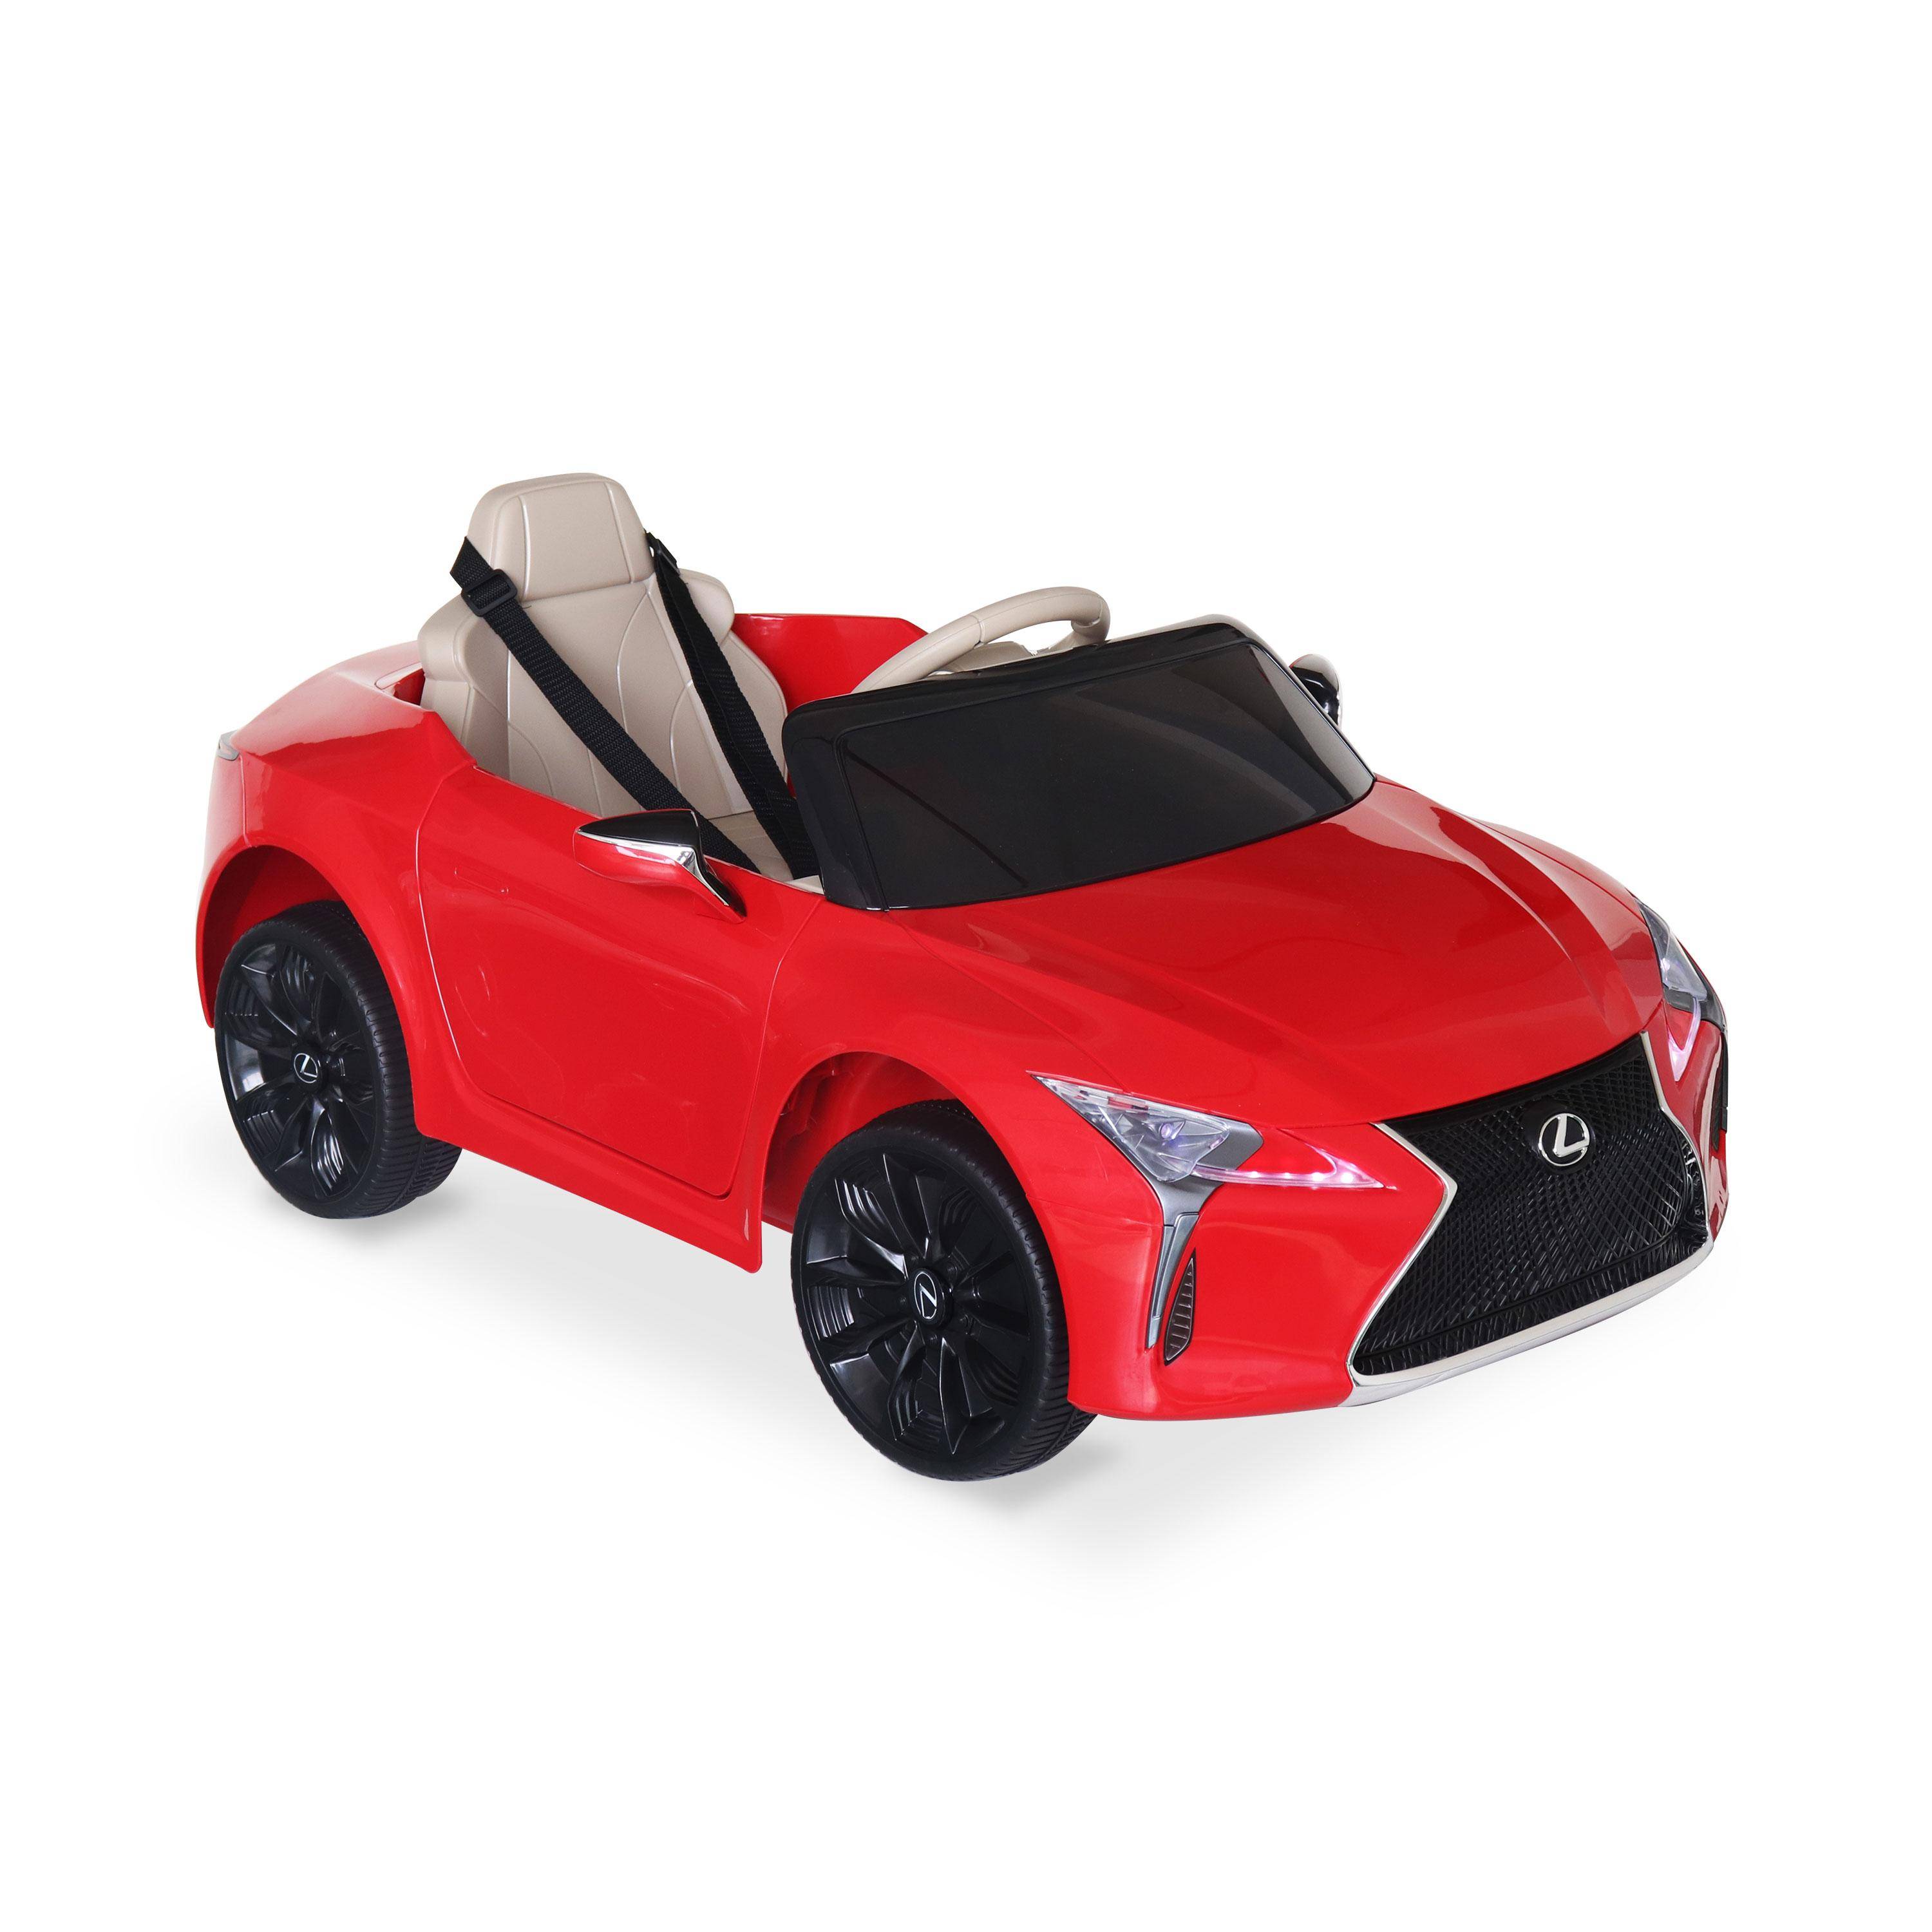 Children's electric car 12V, 1 seat, 4x4 with car radio and remote control - Lexus LC500 - Red,sweeek,Photo2